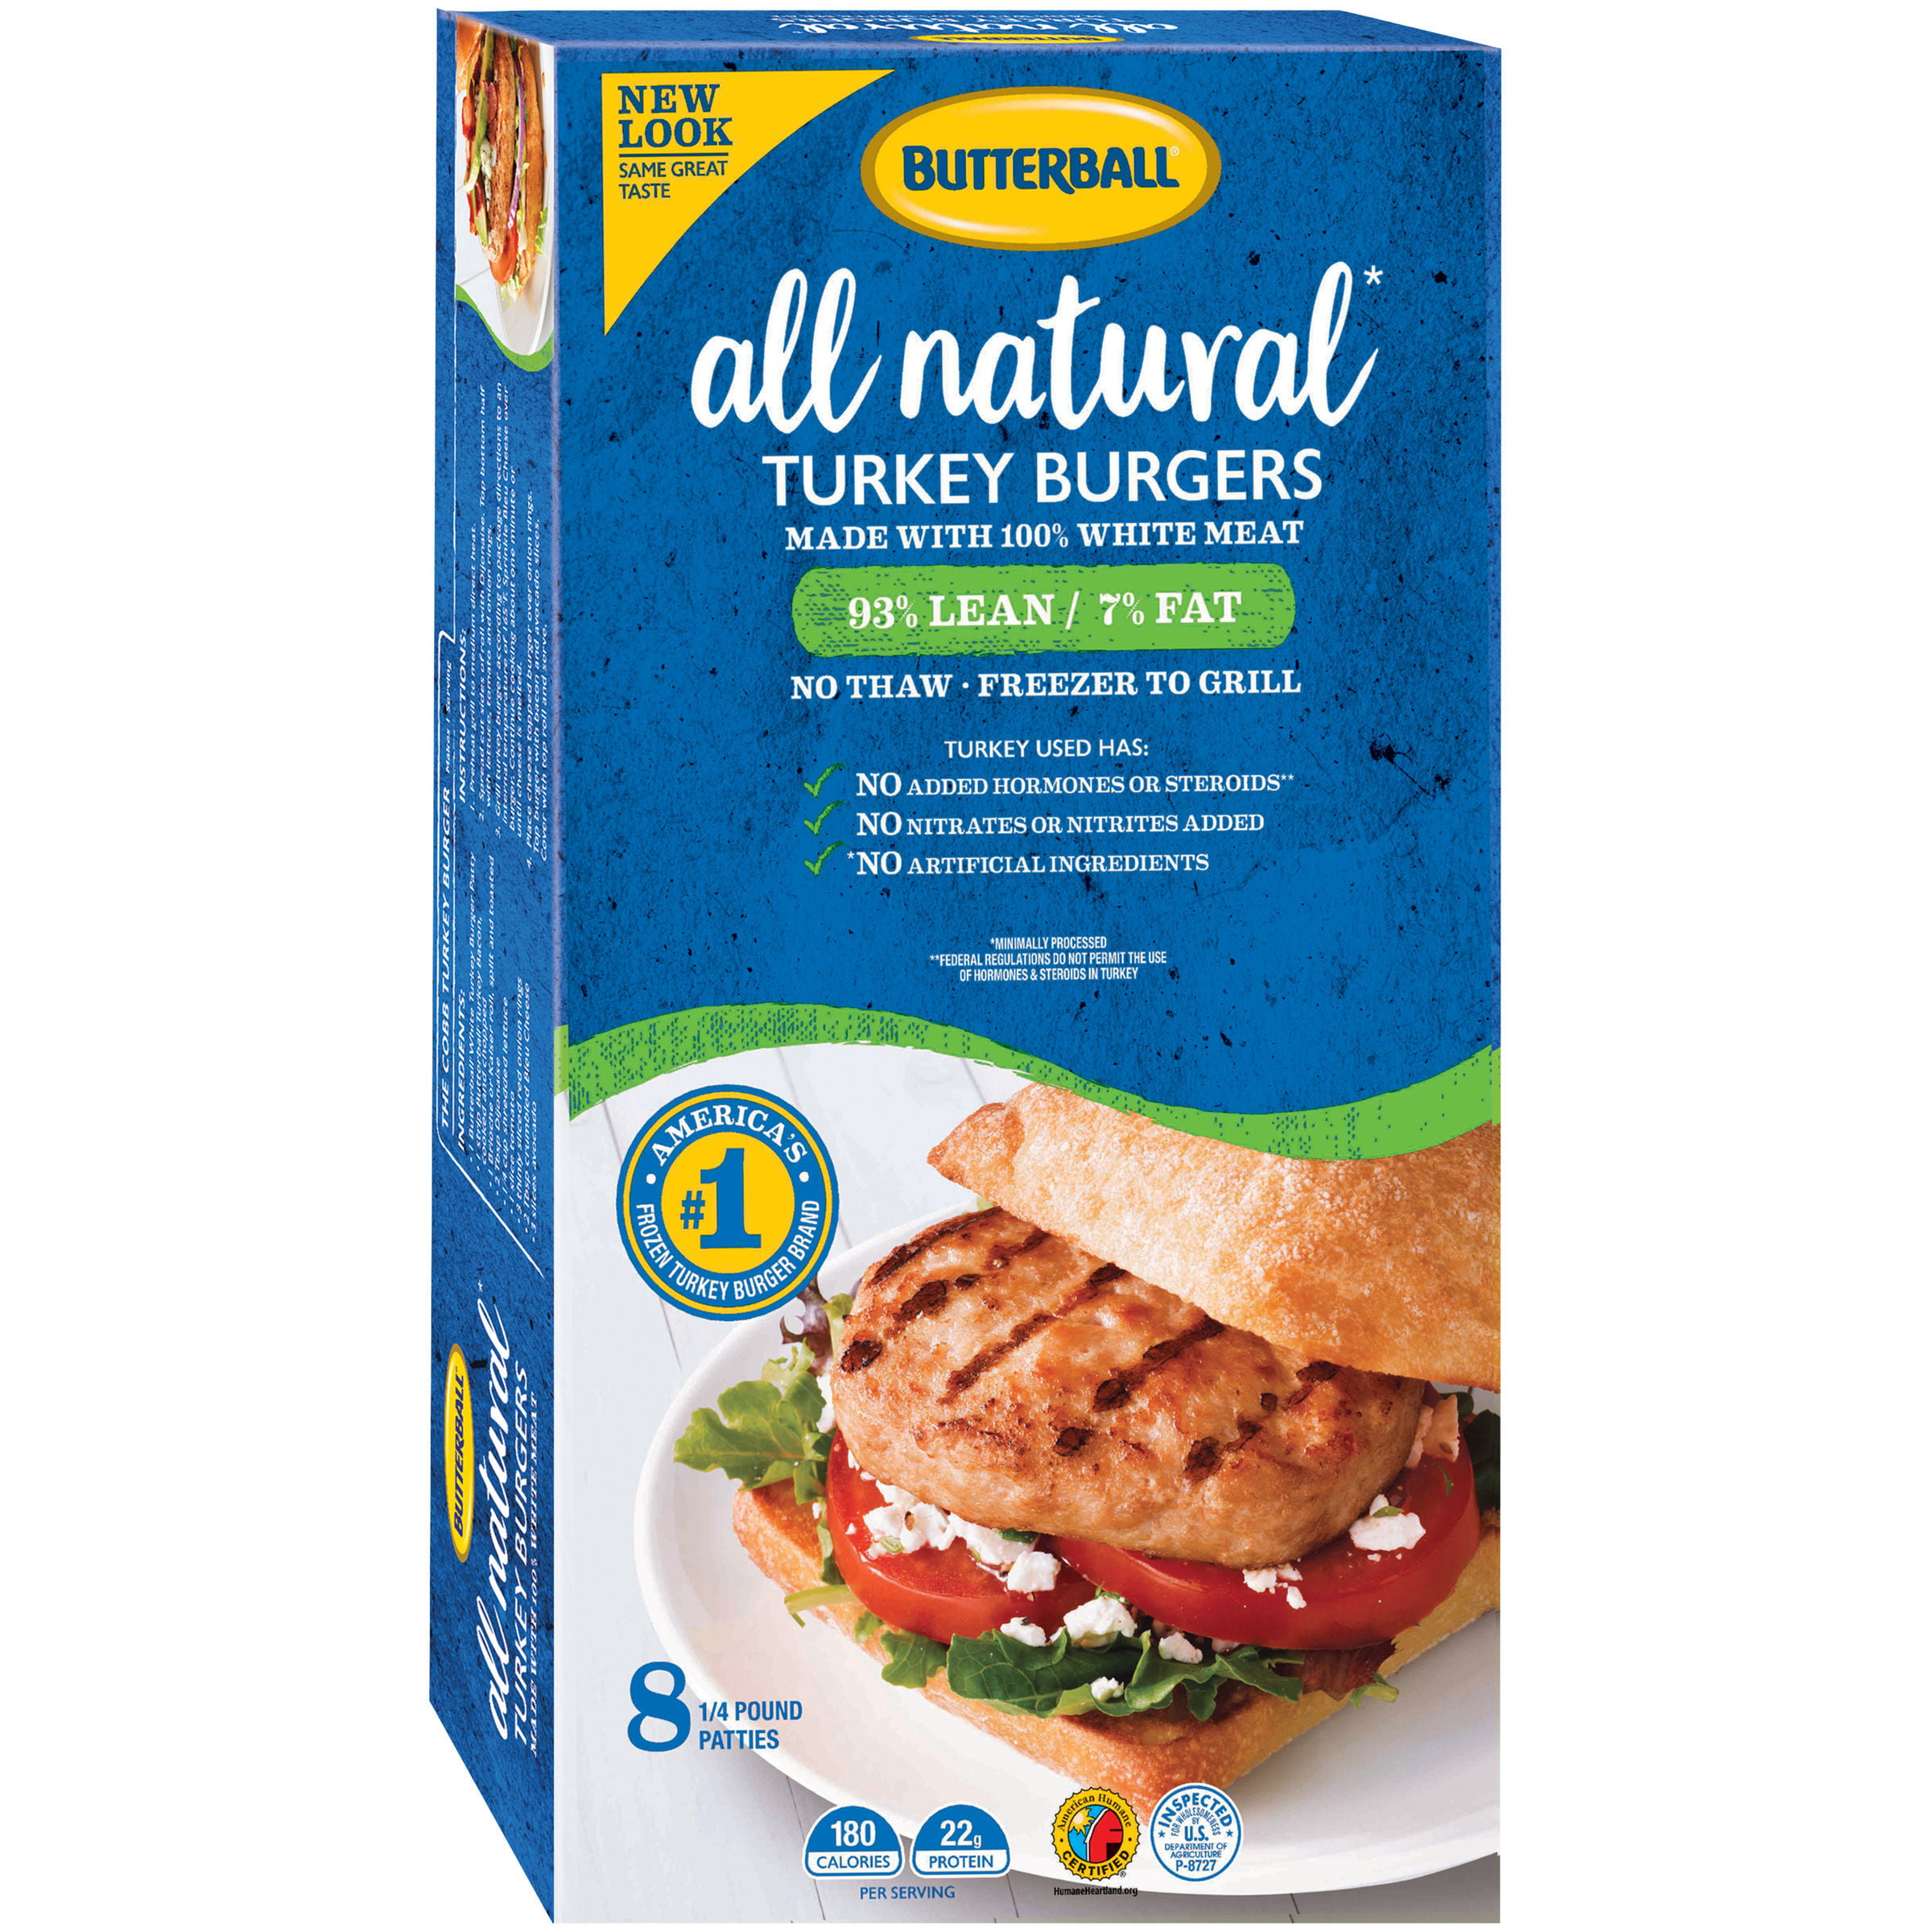 Butterball All Natural Turkey Burgers 32 Oz Box Walmart Com Walmart Com,How To Find An Apartment In Los Angeles